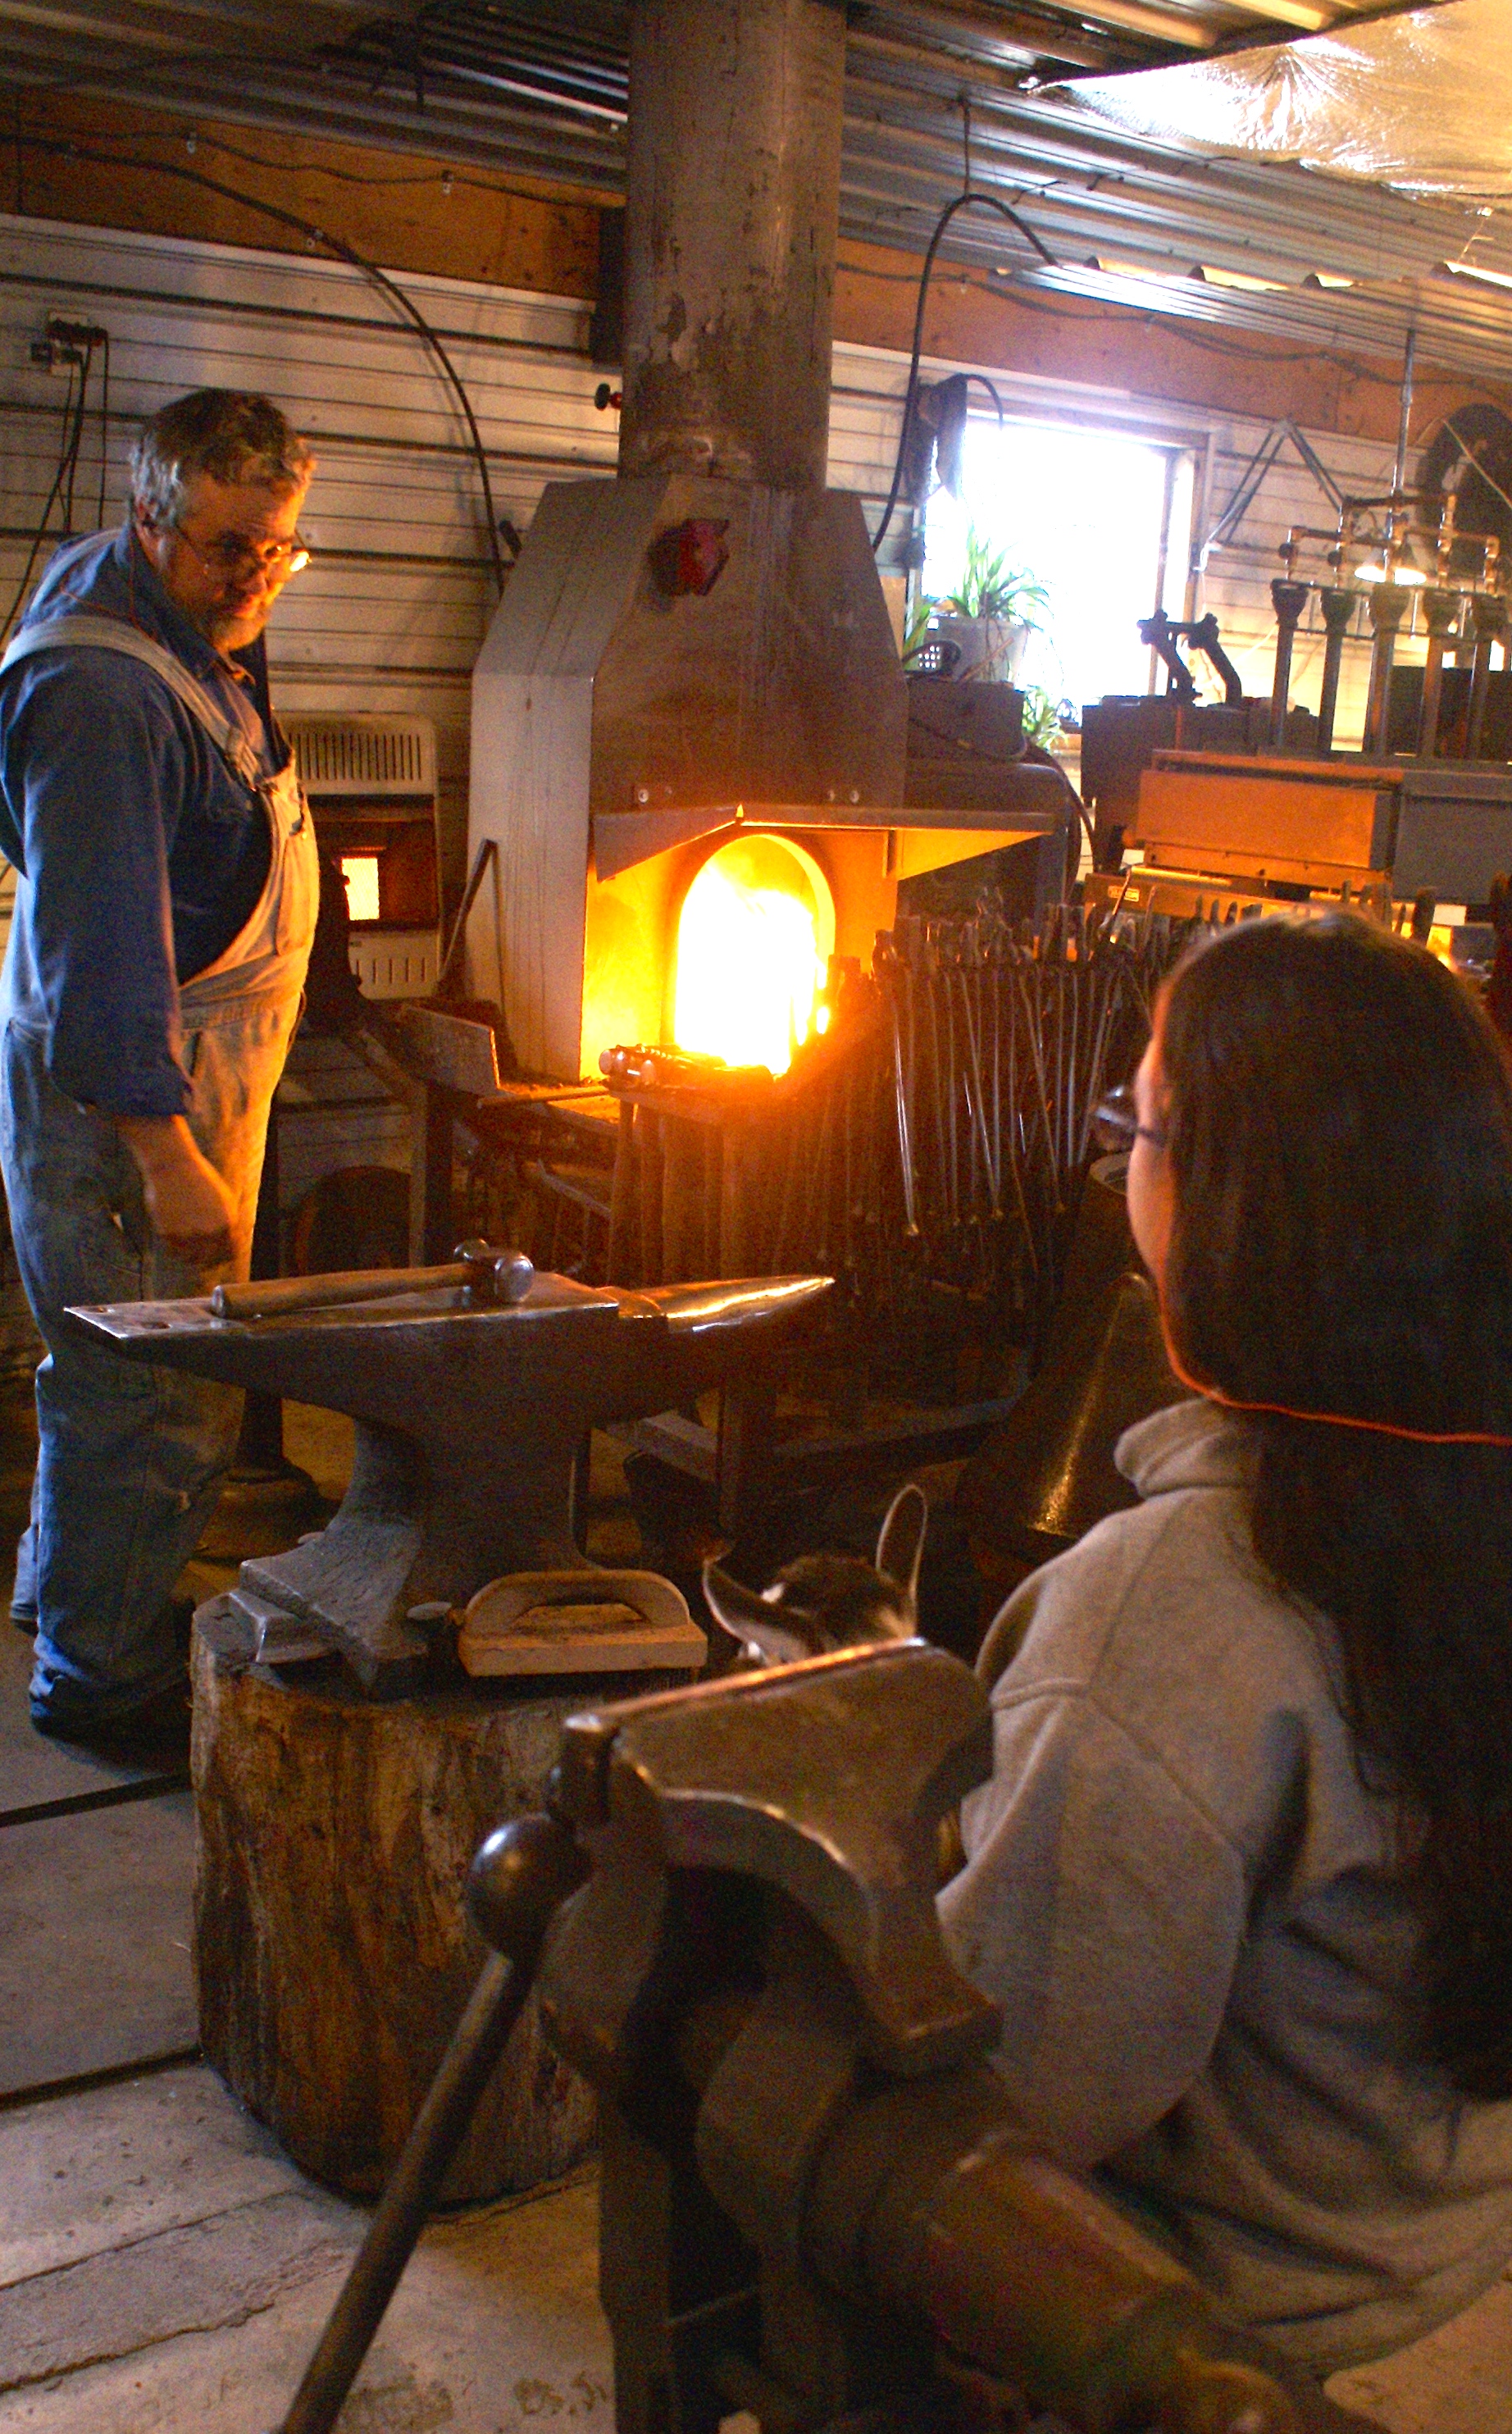 Doug and Danielle talk over the day's work while the forge warms to working temperatures.